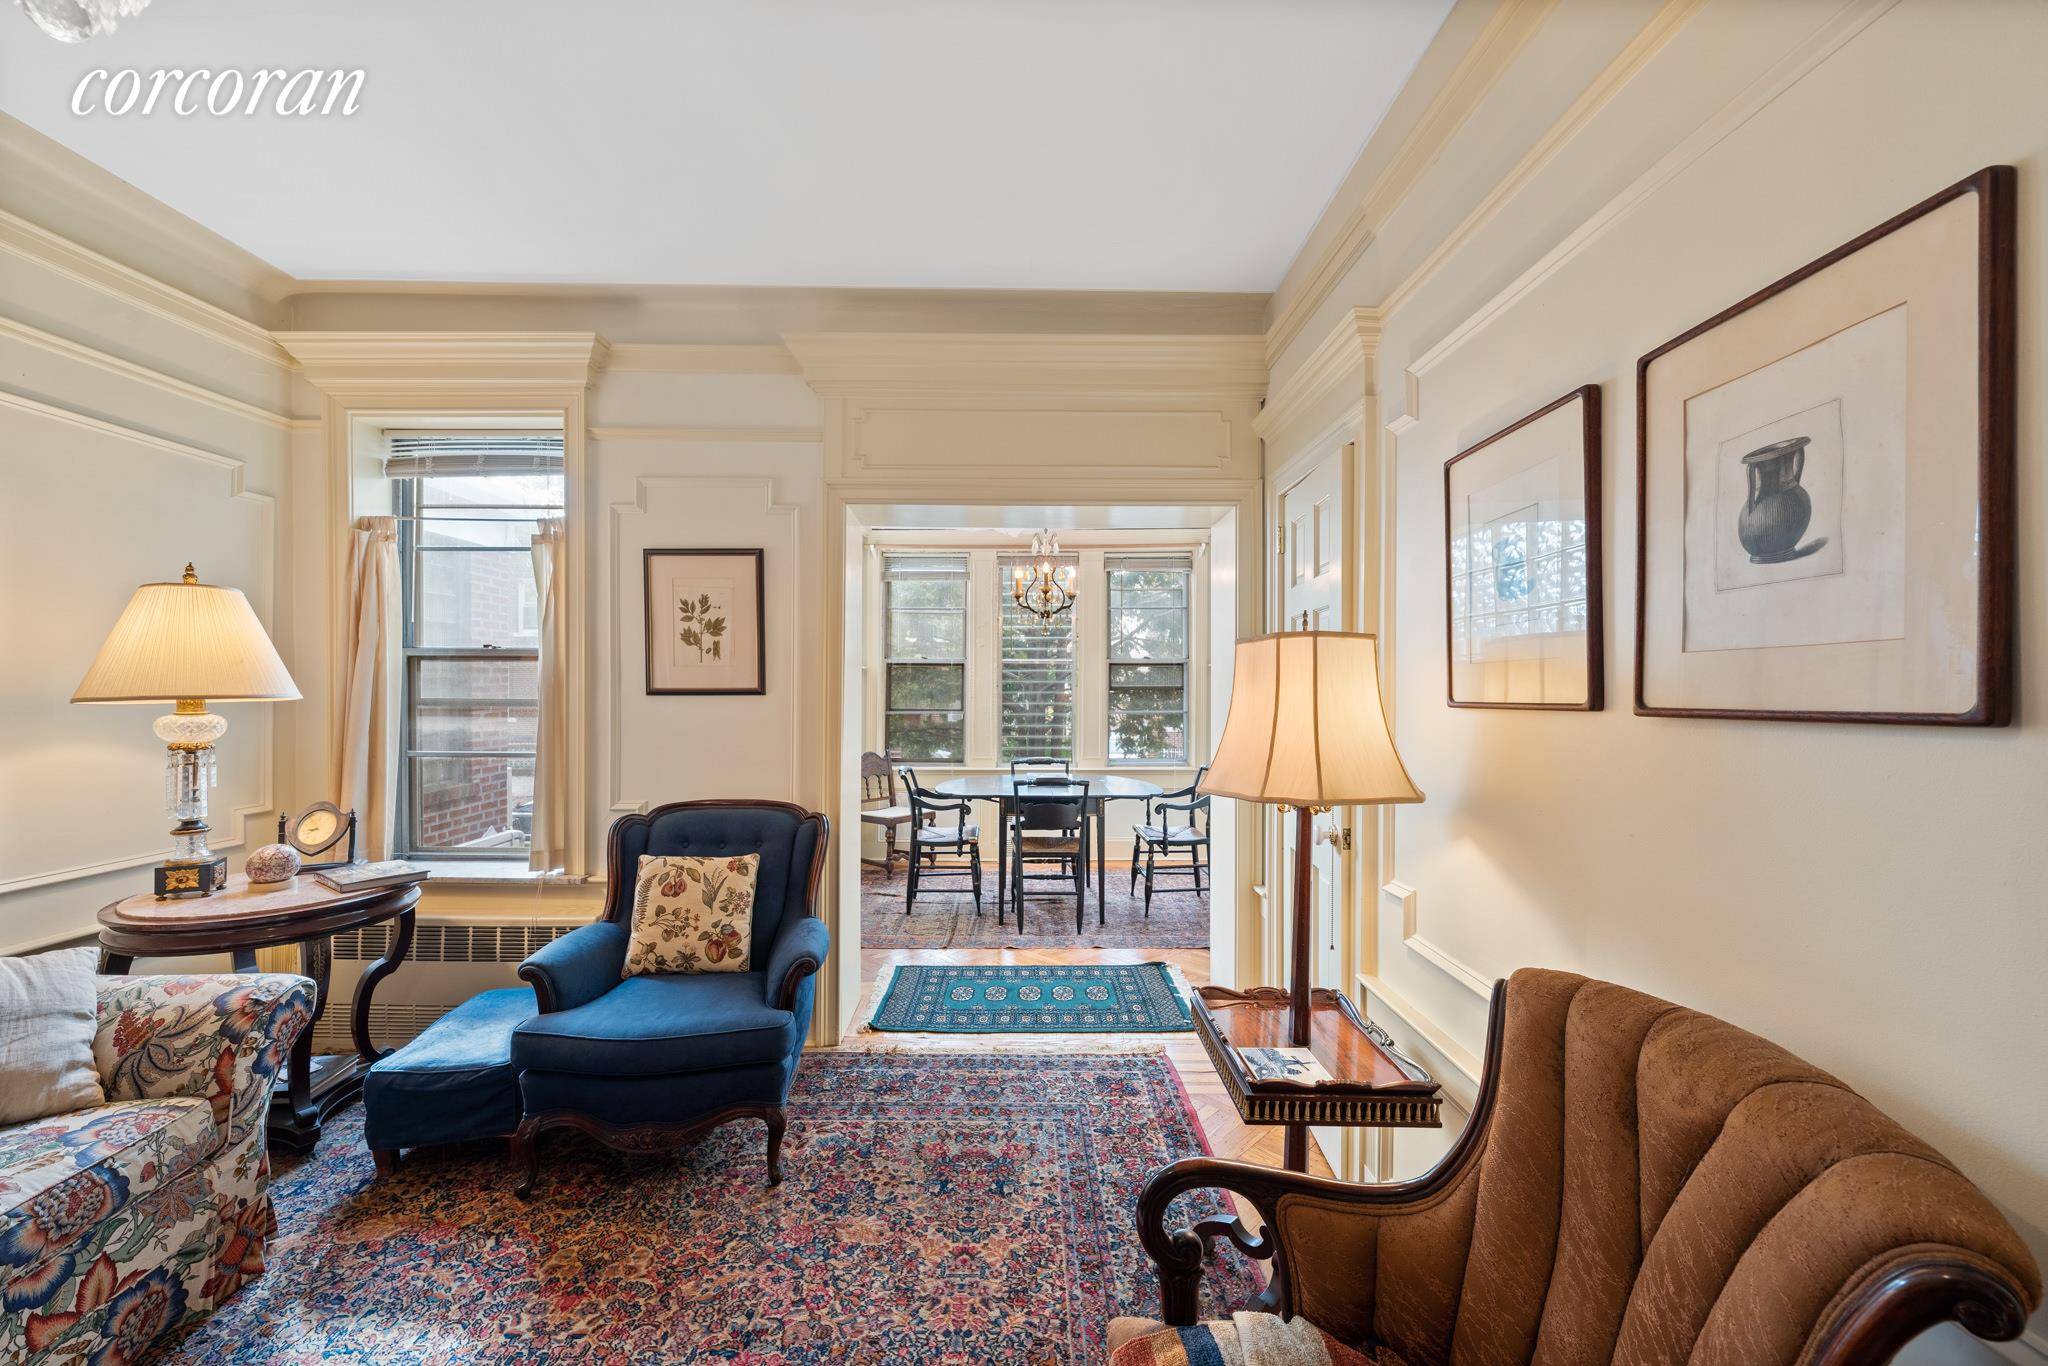 For the first time in 100 years this classic Brooklyn townhouse is available for purchase.